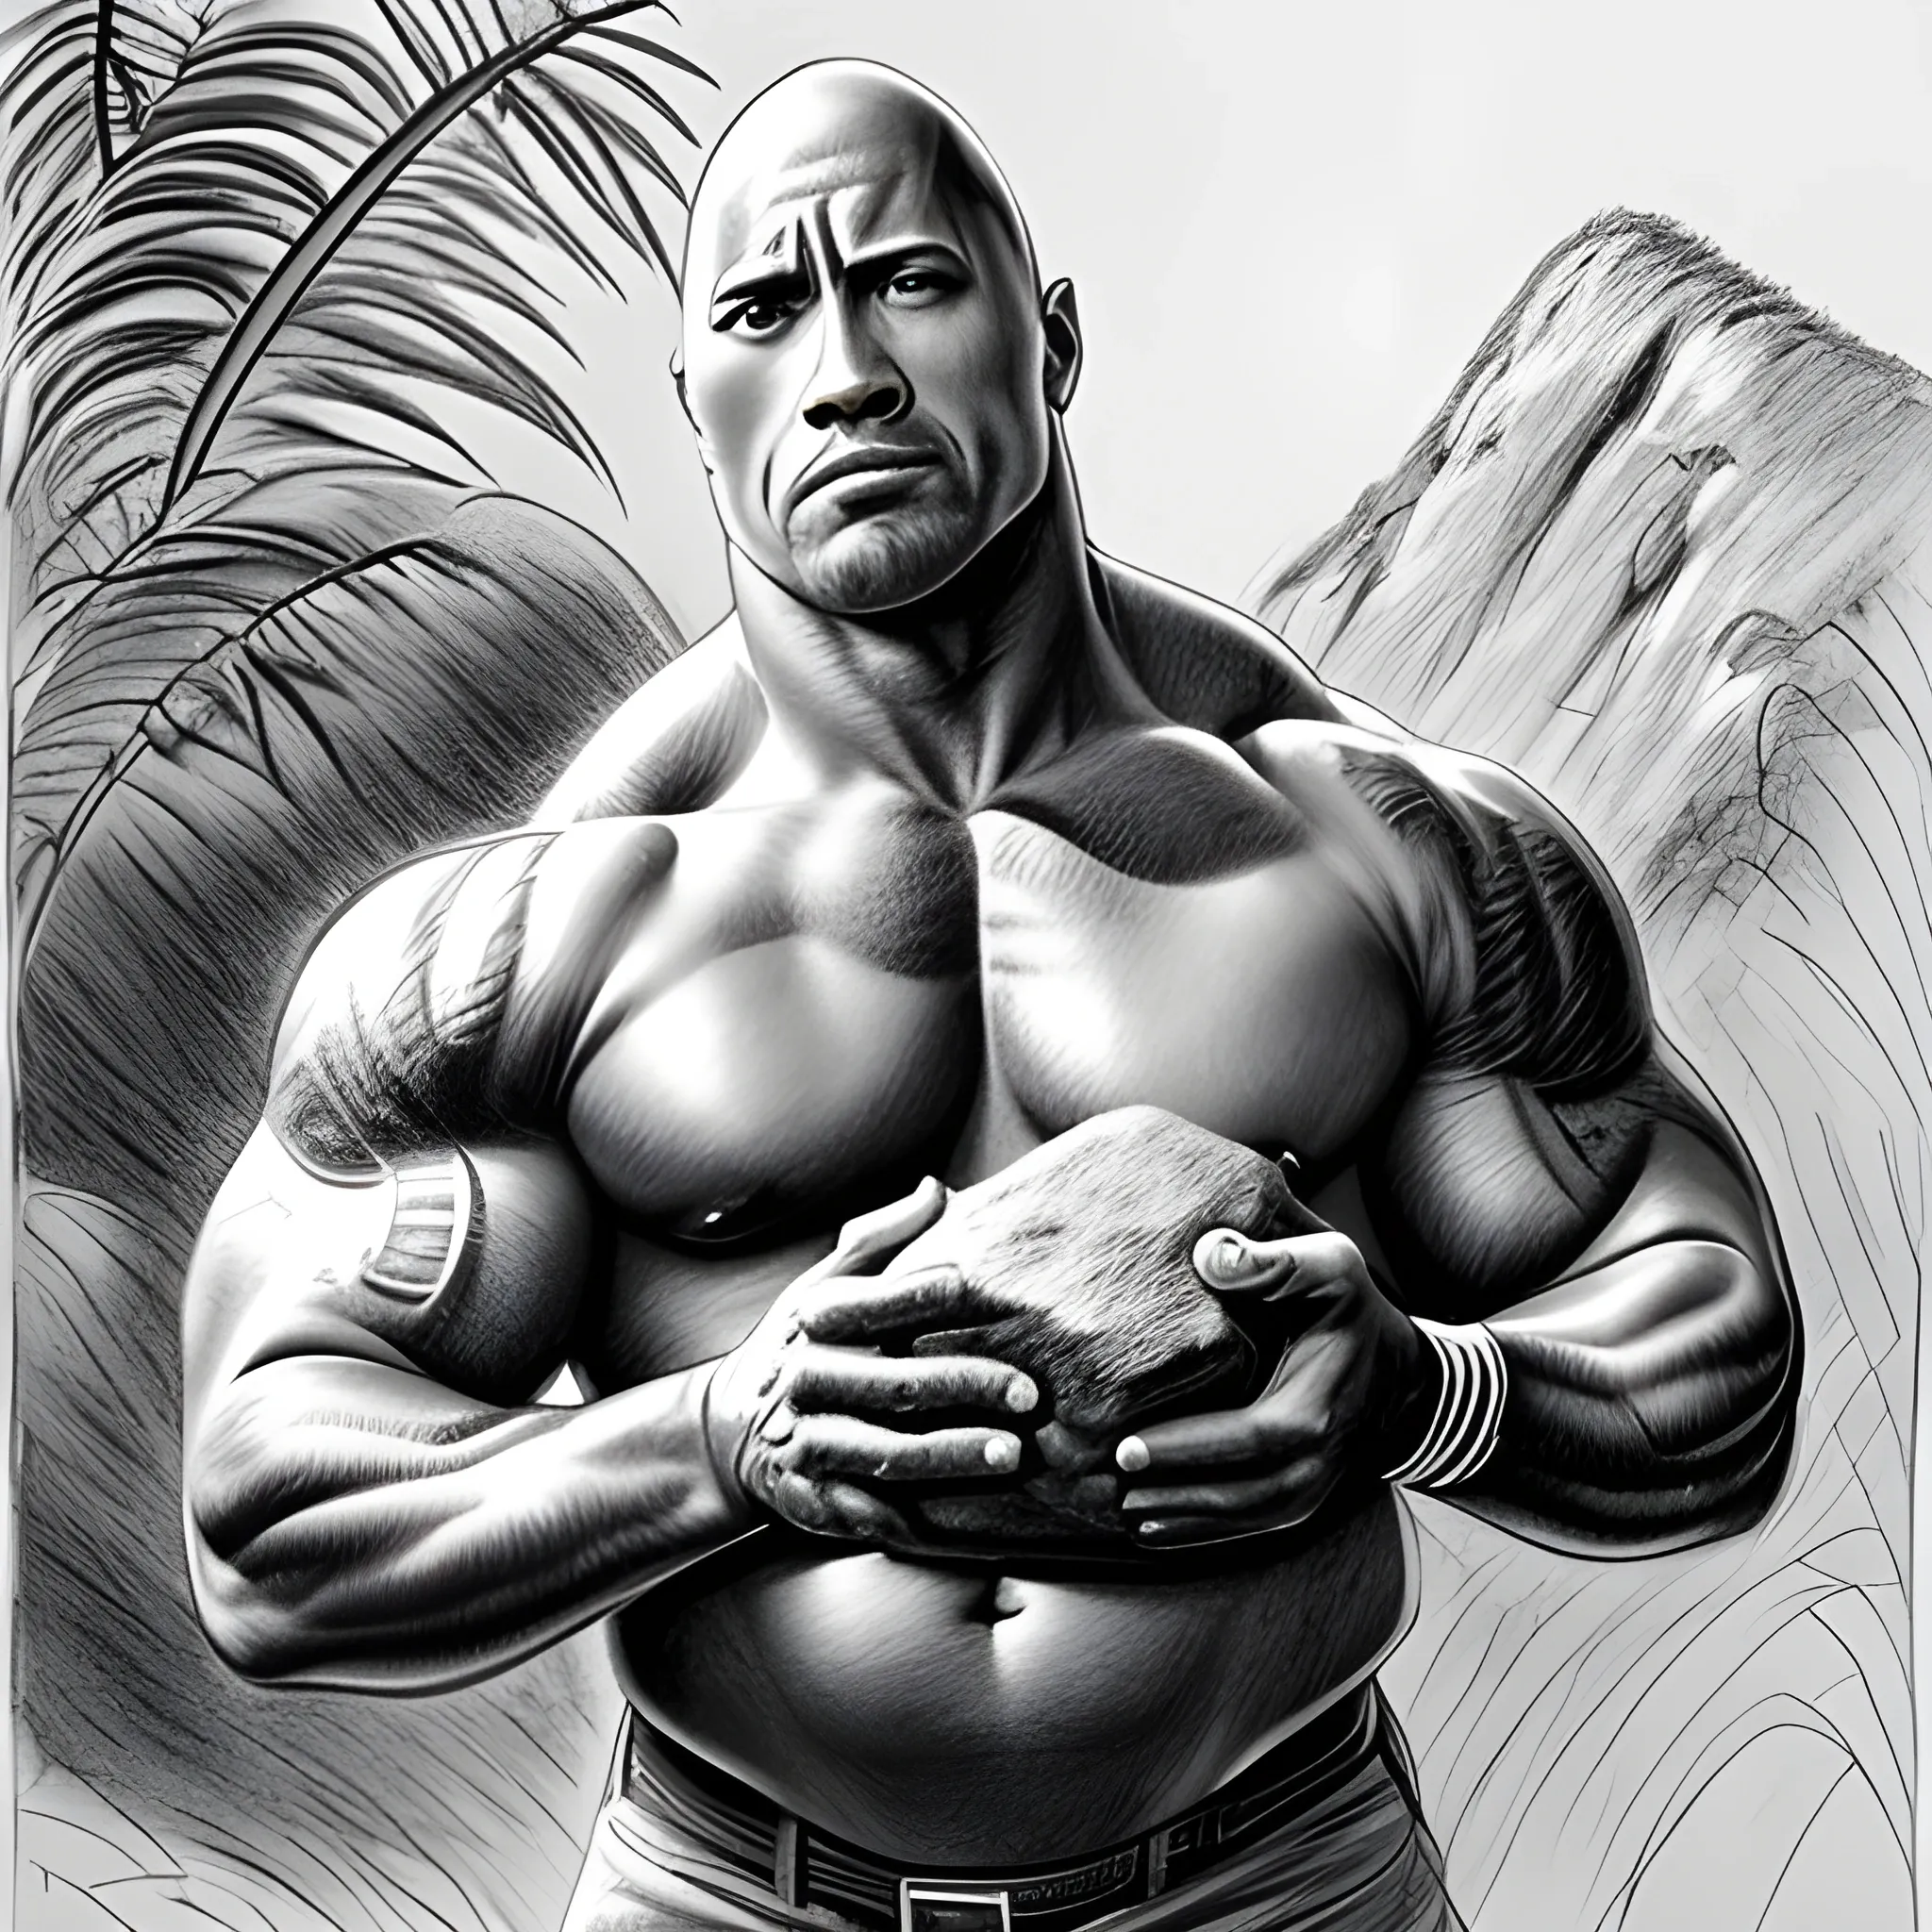 How To Draw The Rock Dwayne Johnson Step By Step - YouTube